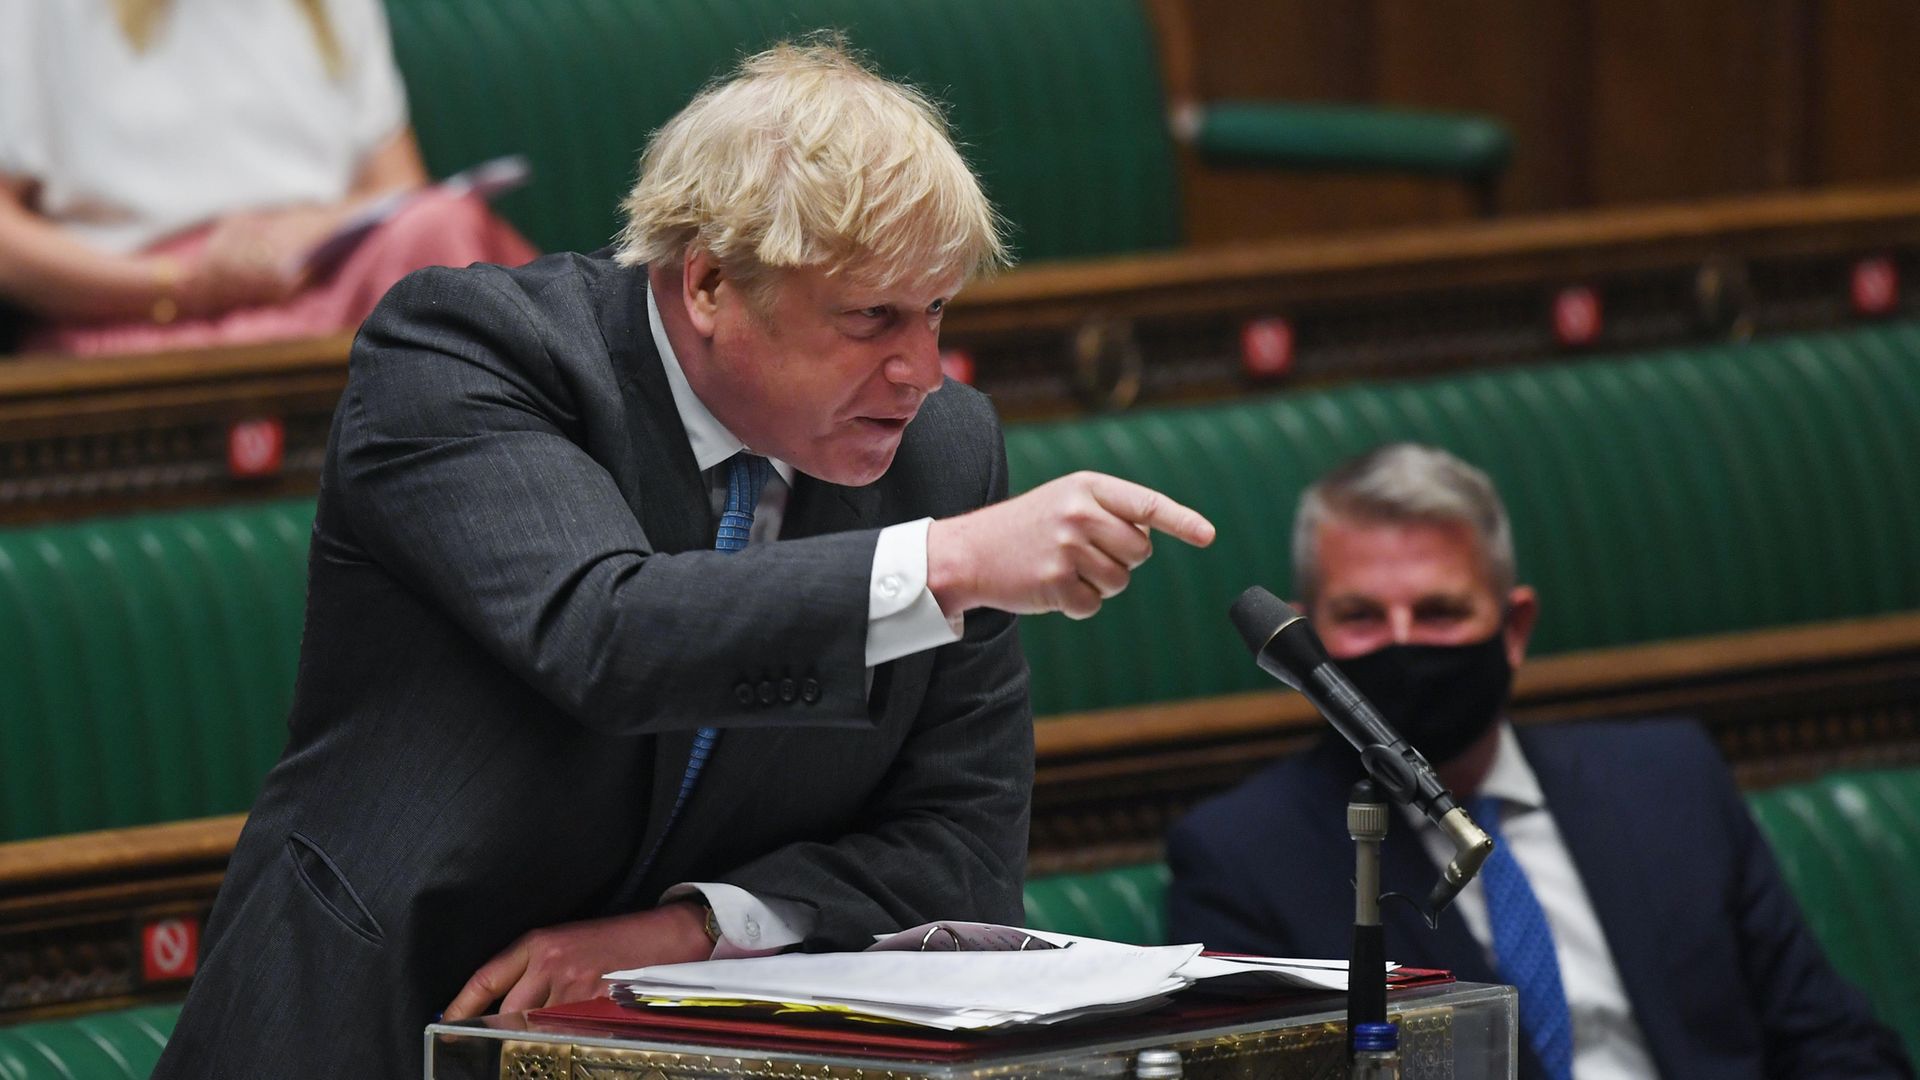 Boris Johnson is rattled by Keir Starmer's line of questioning at PMQs - Credit: Jessica Taylor/House of Commons